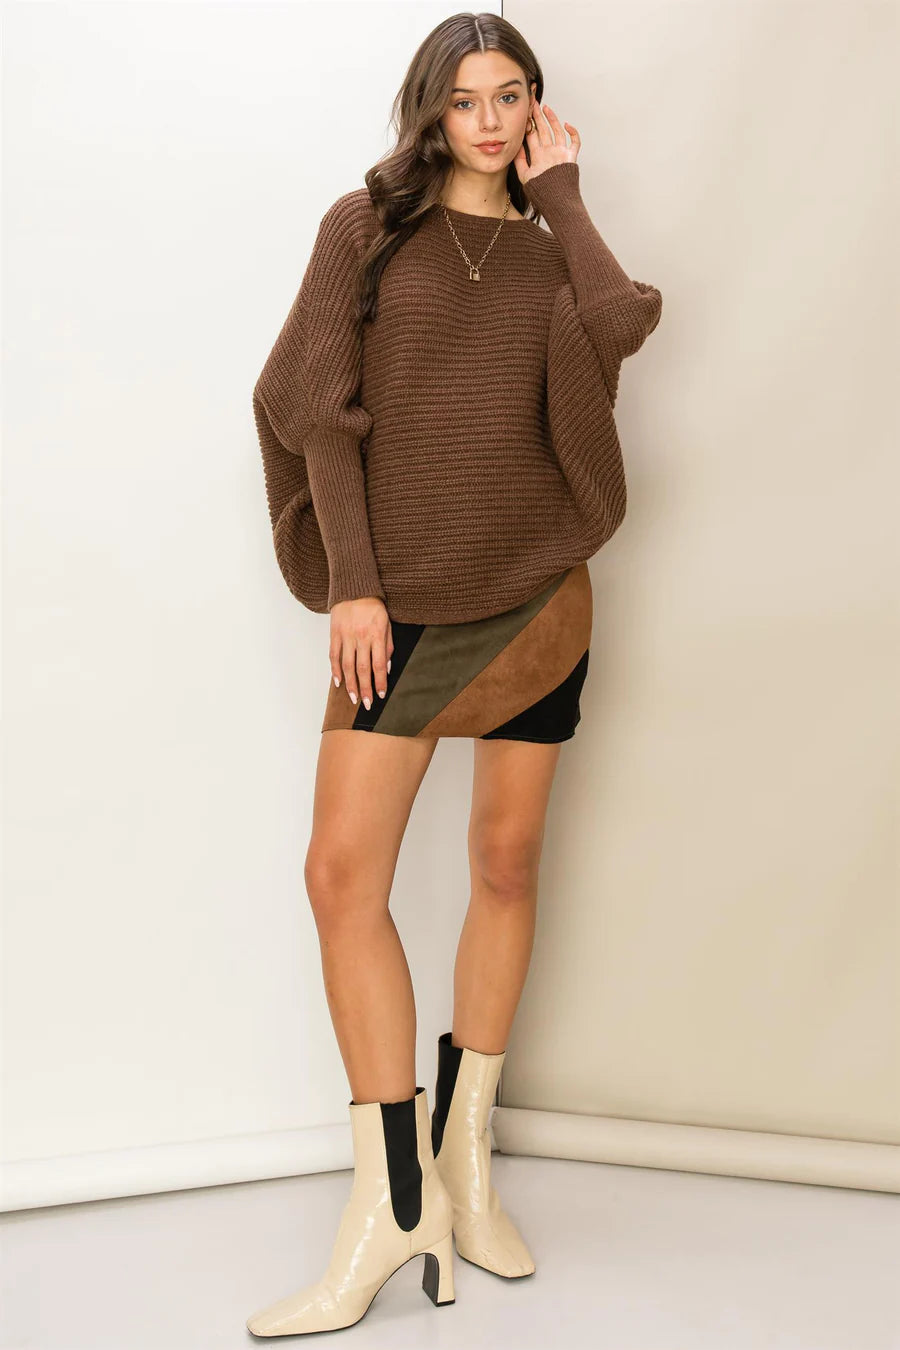 The Style Starter Sweater